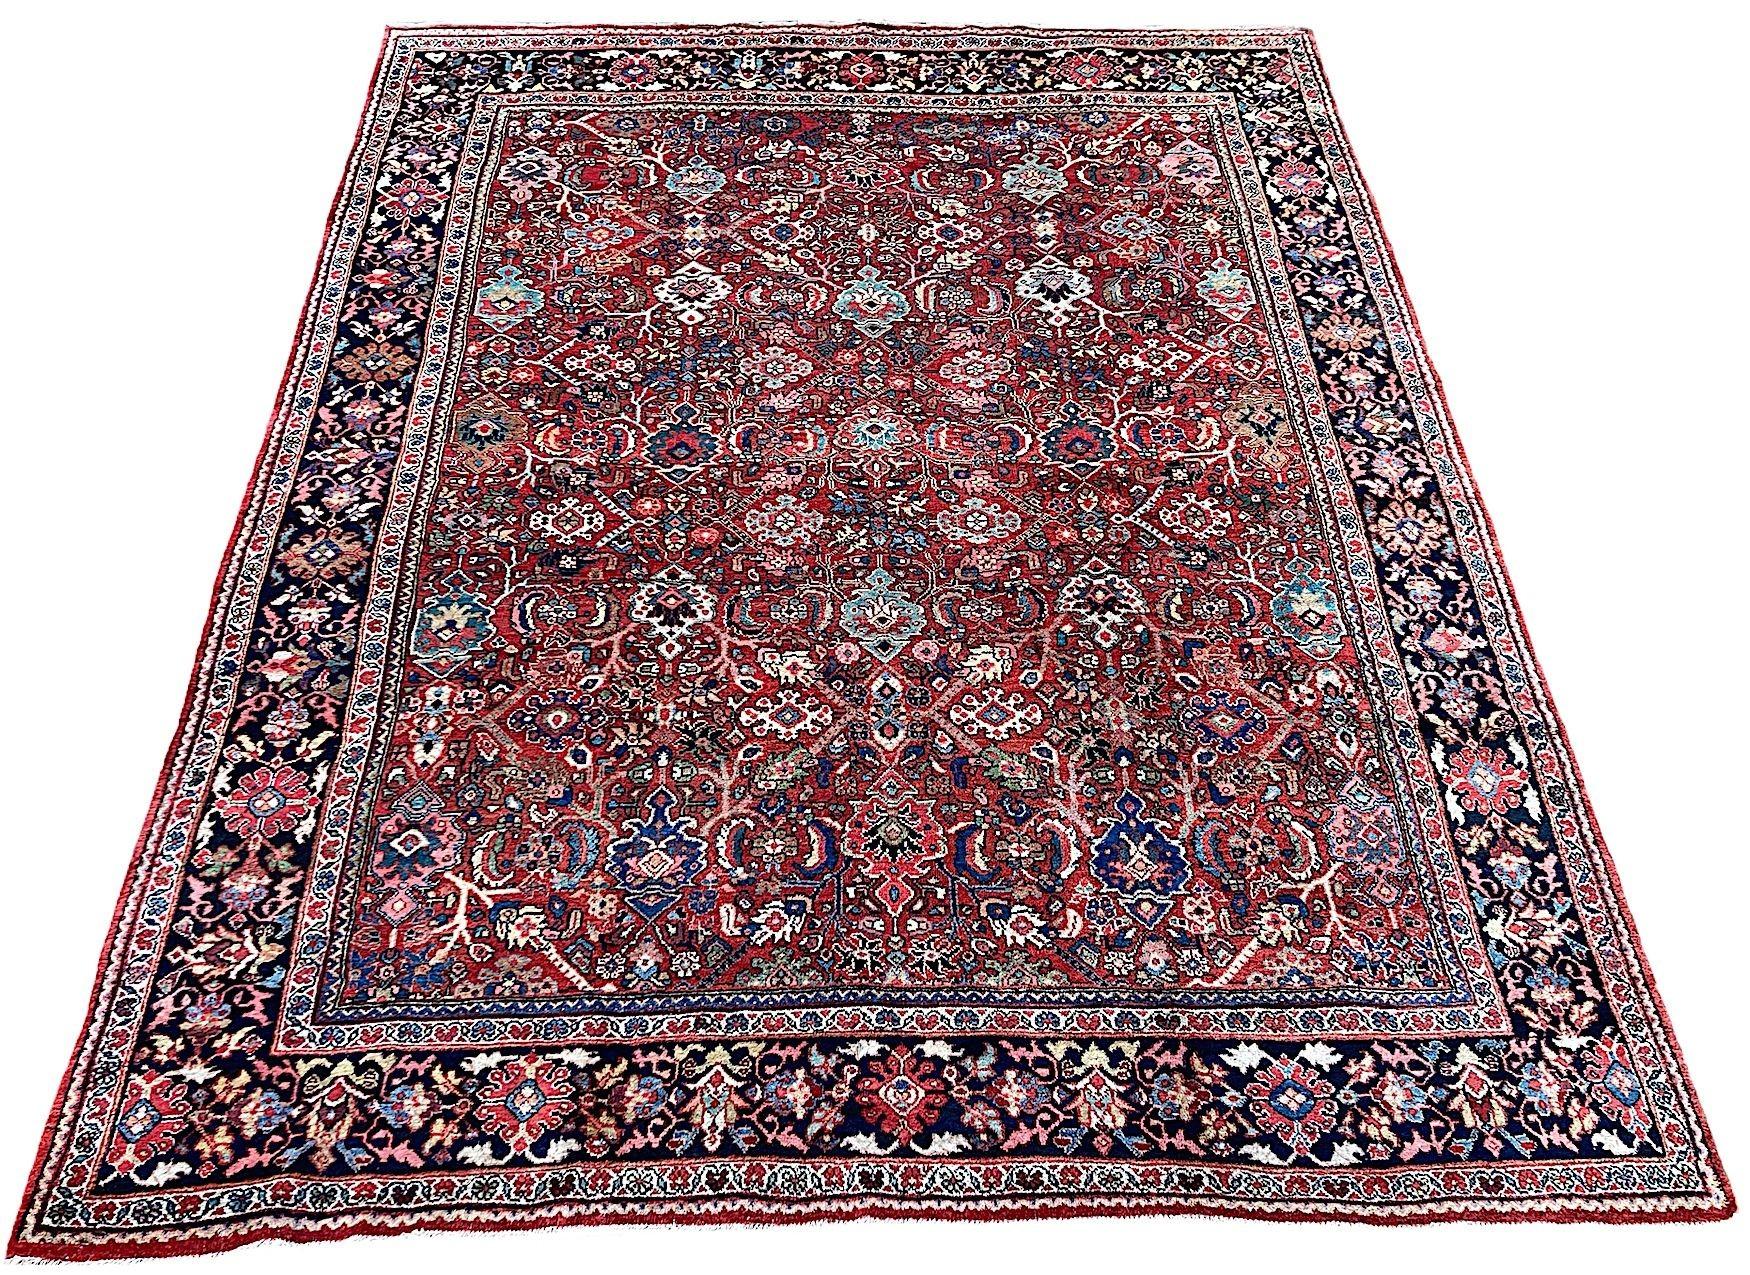 A beautiful antique Mahal carpet, hand woven circa 1900. The carpet features a much sought after all over design of large palmettes and flower heads on a rich terracotta field surrounded by an indigo border. Fabulous secondary colours of soft blues,